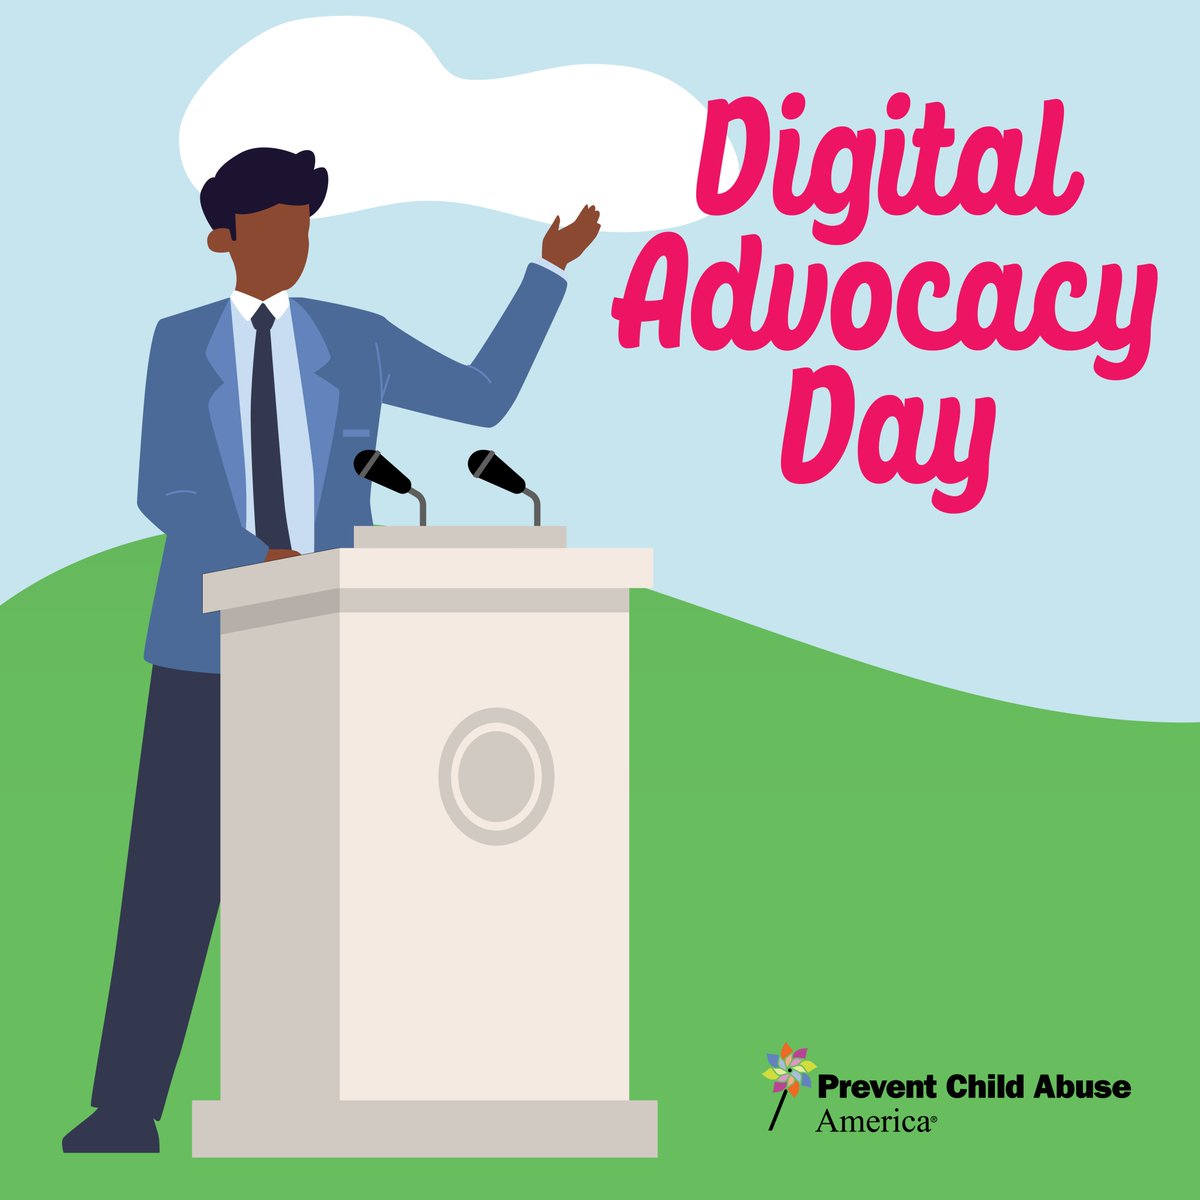 As part of Child Abuse Prevention Month's Digital Advocacy Day today, we invite you to educate lawmakers about prevention polices that positively impact families and children. Learn more below! oneclickpolitics.global.ssl.fastly.net/messages/edit?…
#BuildingTogether #CAPMonth2024 #HopefulFutures